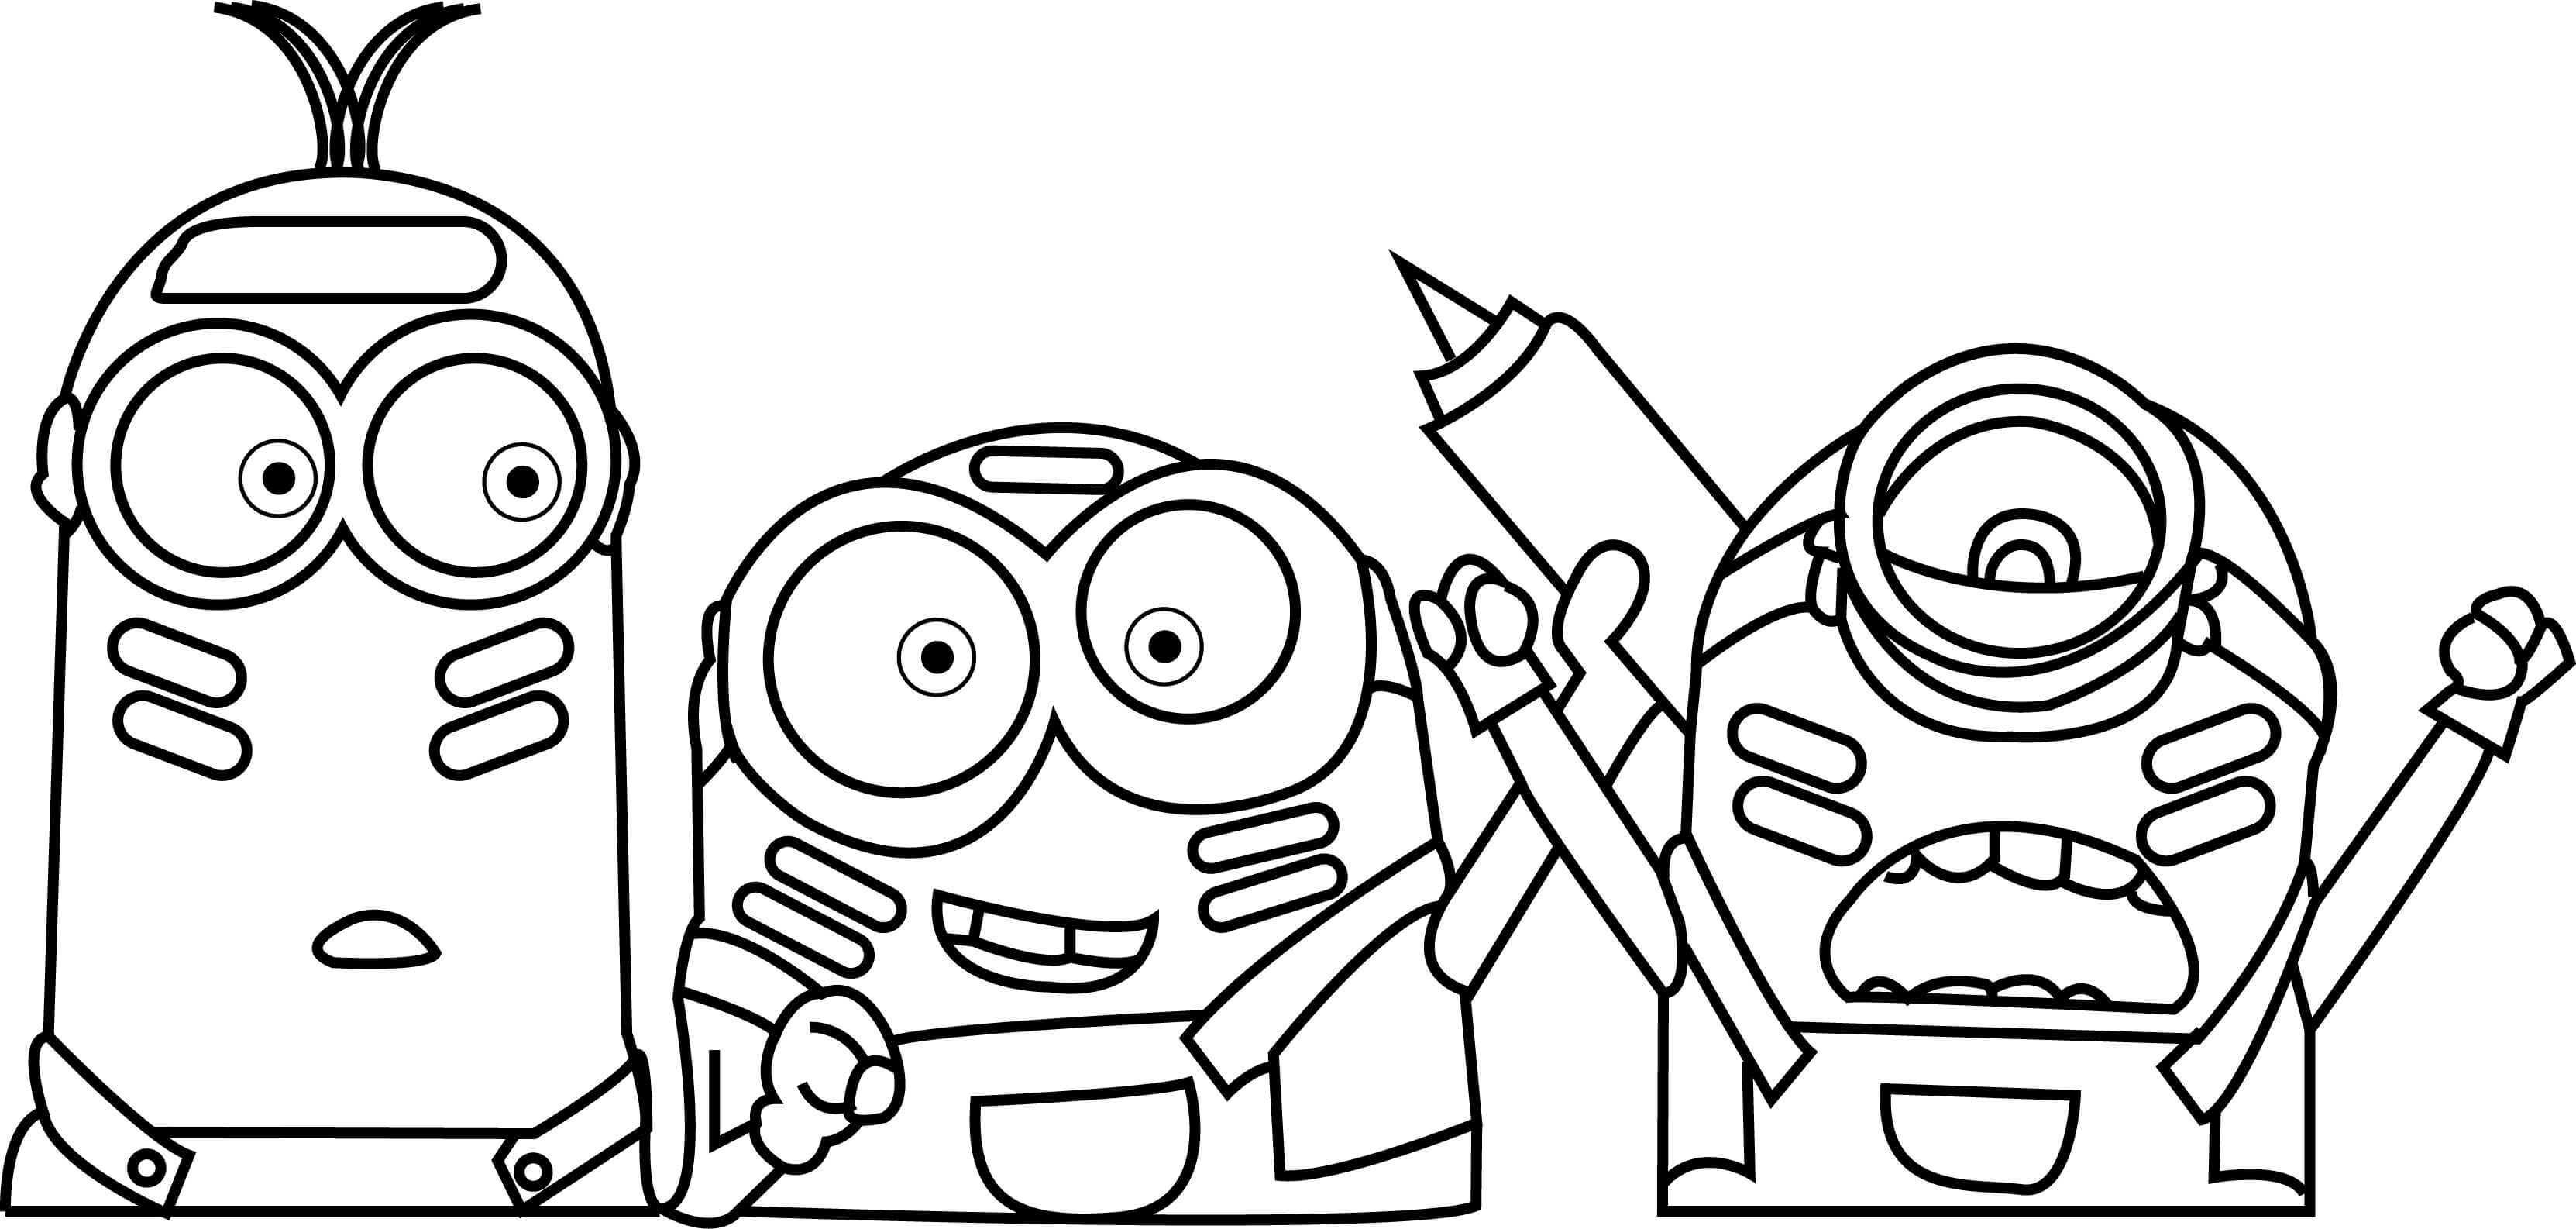 Printable Minions Coloring Page